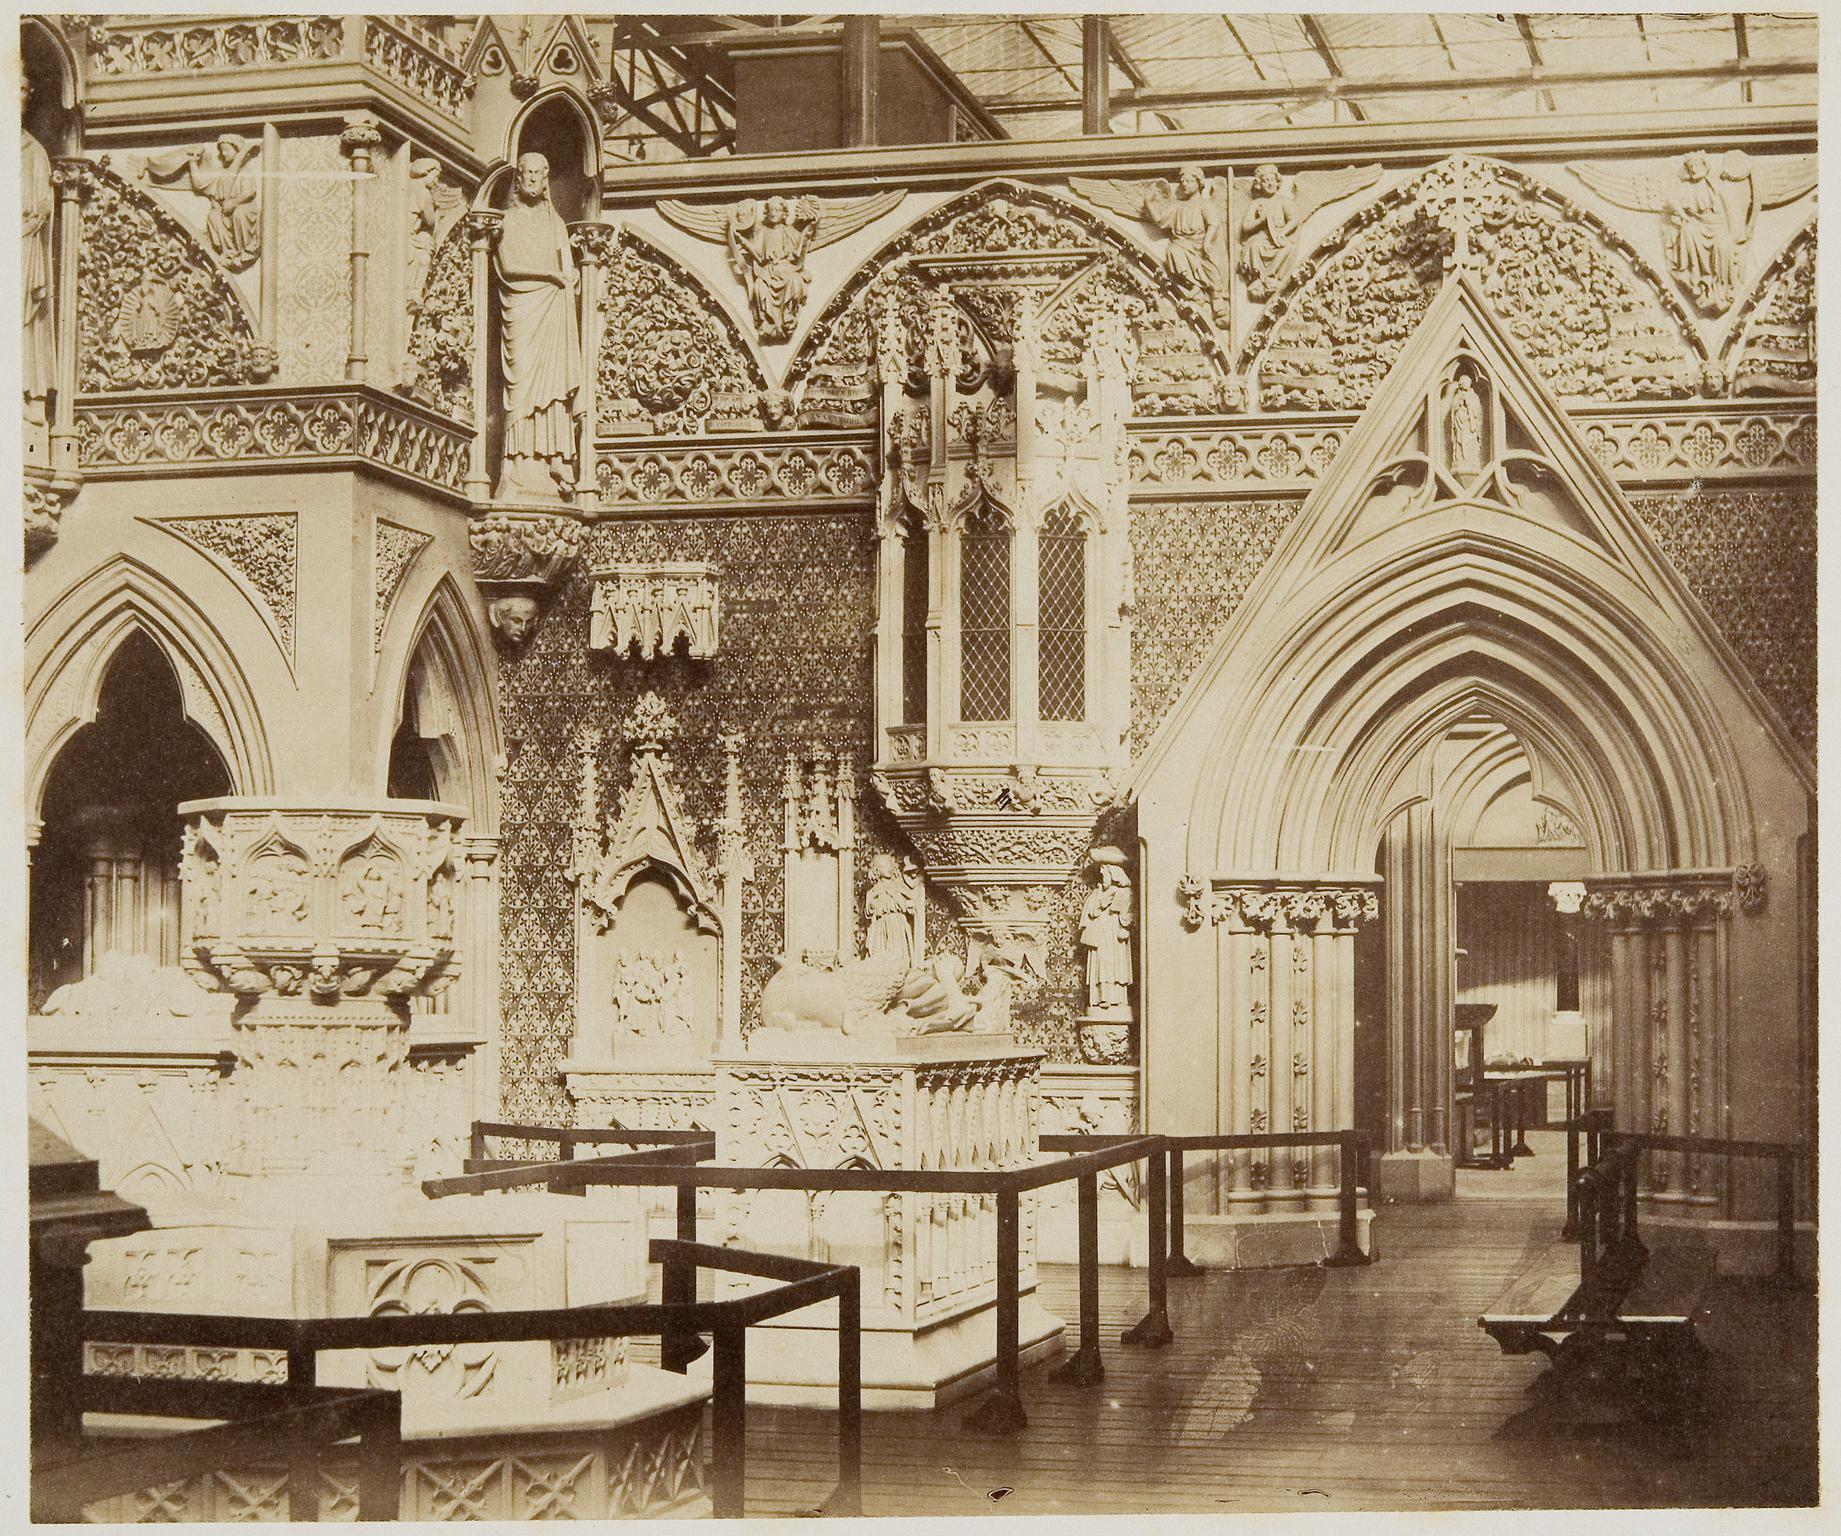 Exhibition of church monuments, photograph